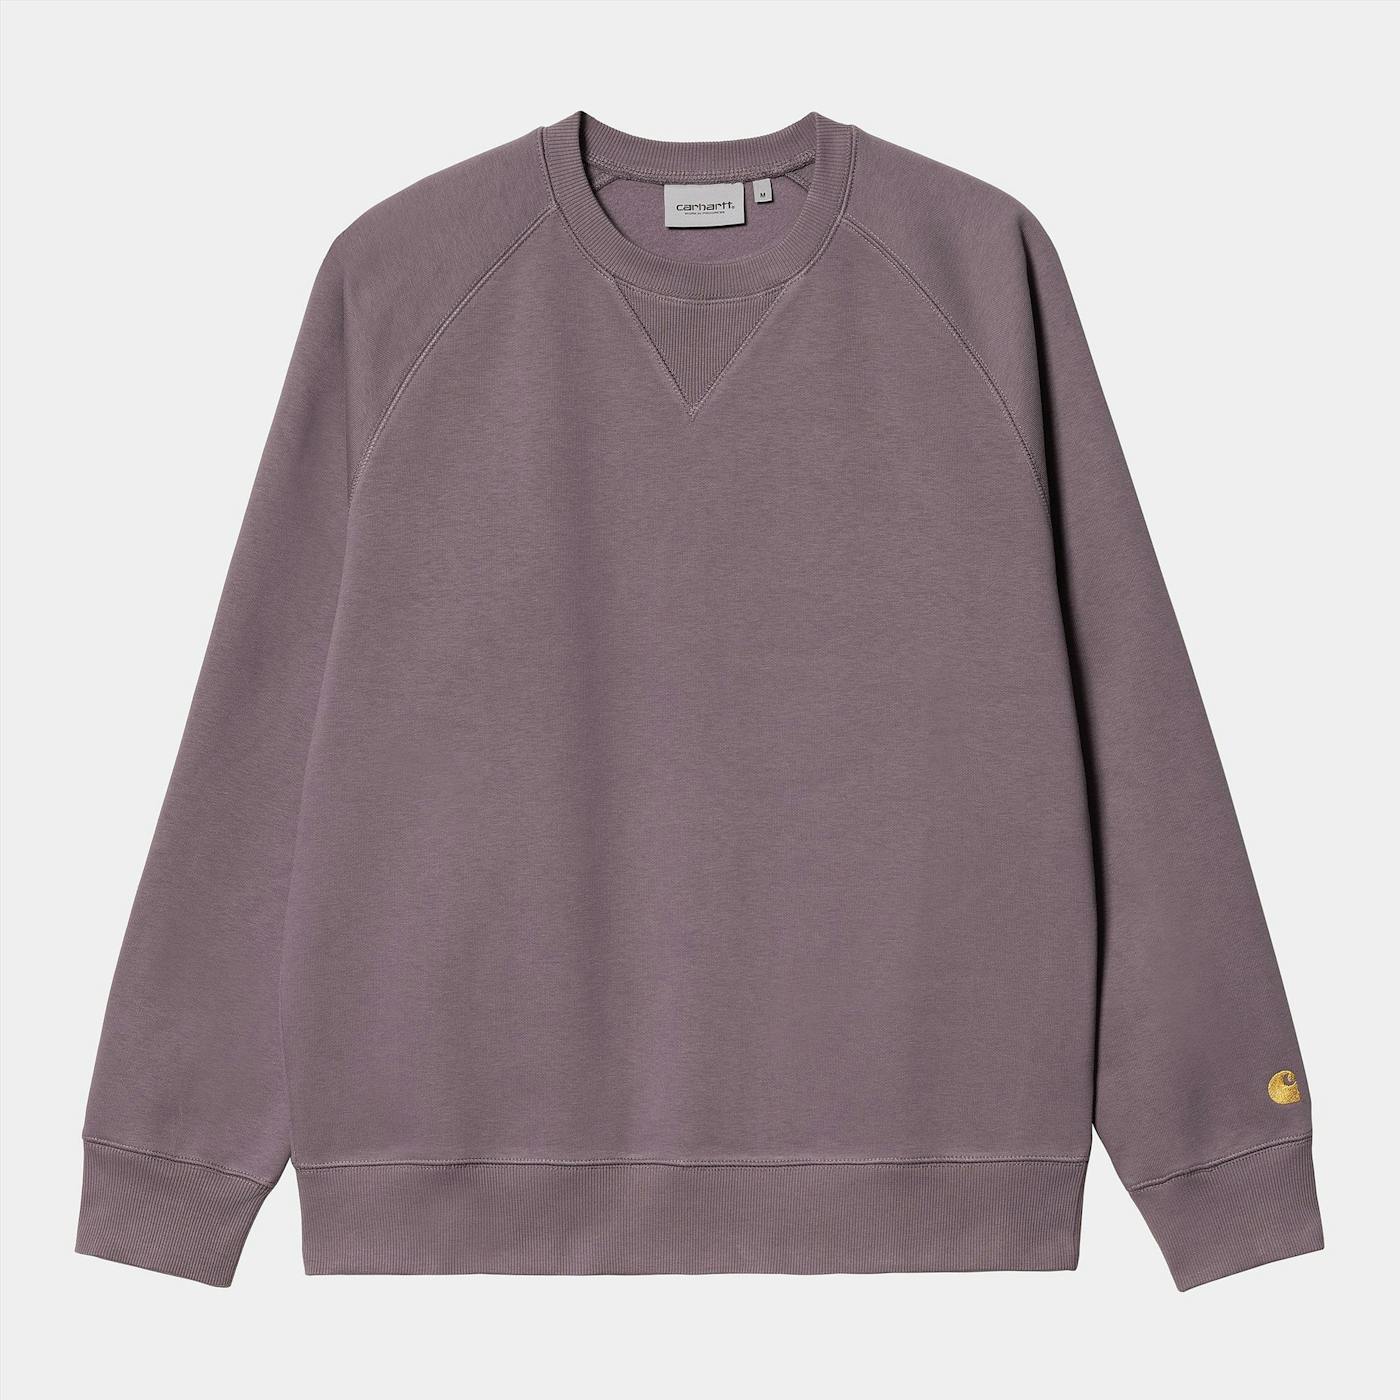 Carhartt WIP - Paarse Chase sweater